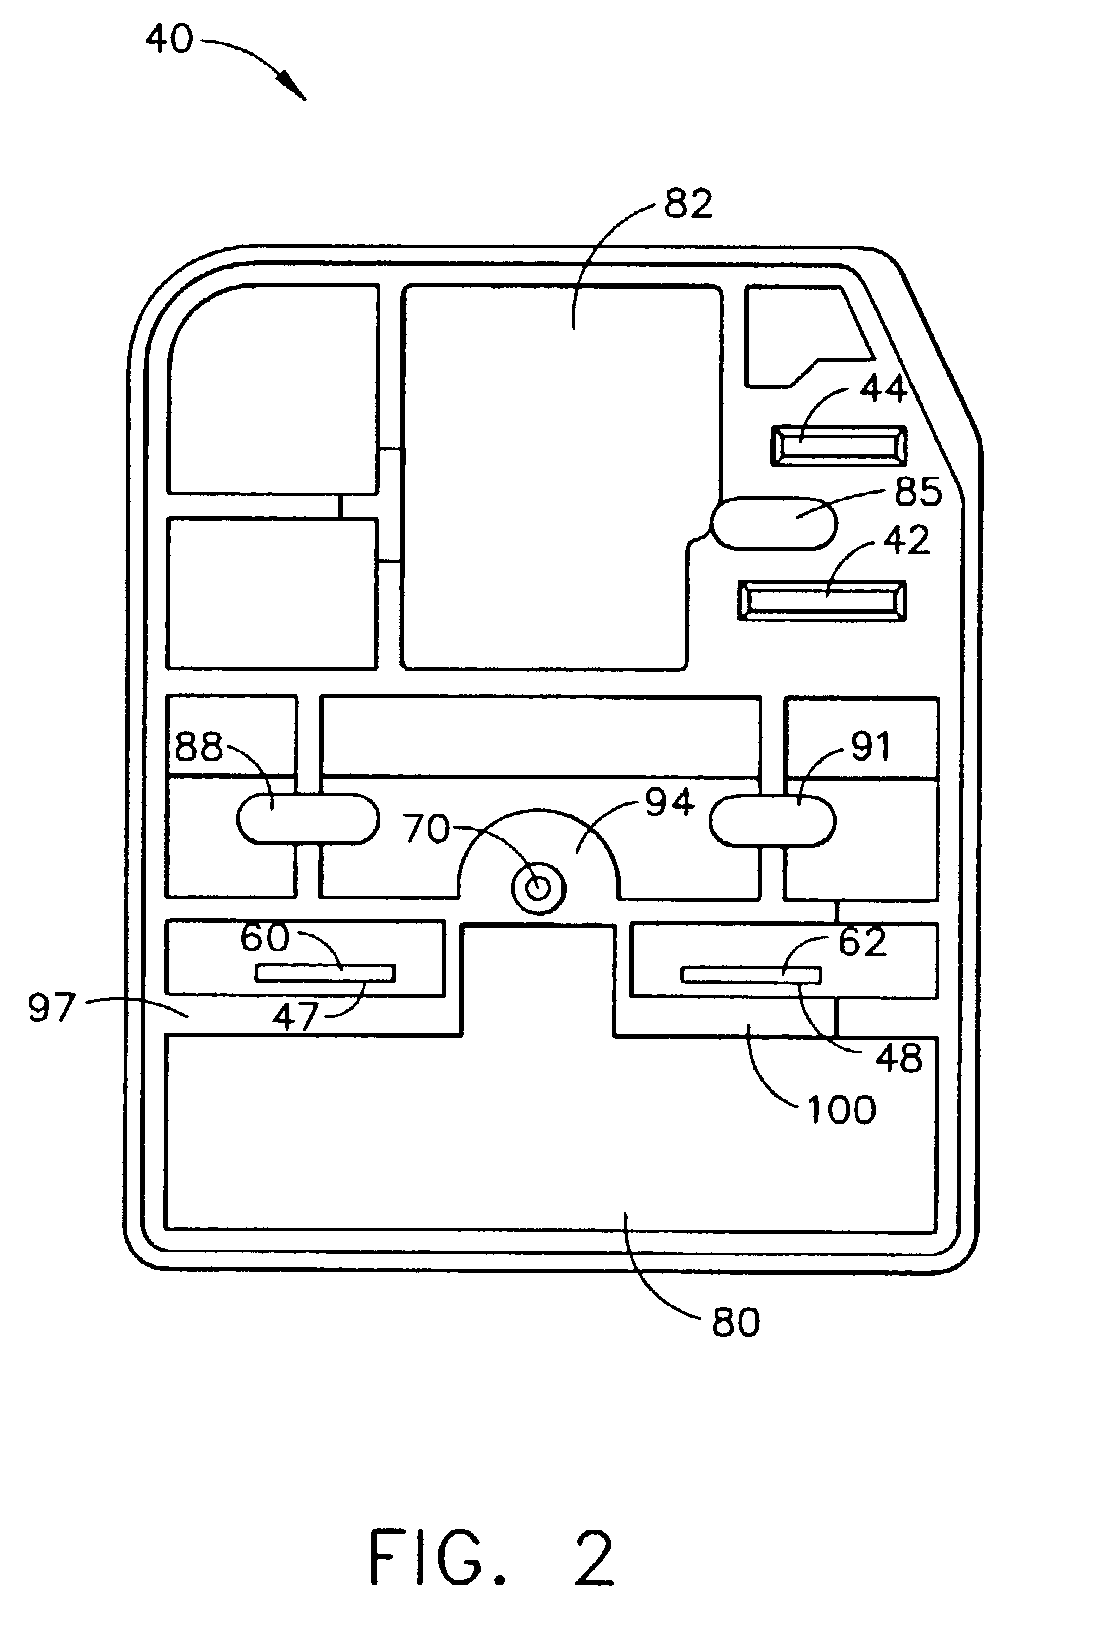 Method and apparatus for combining PTCR/OL and run capacitor